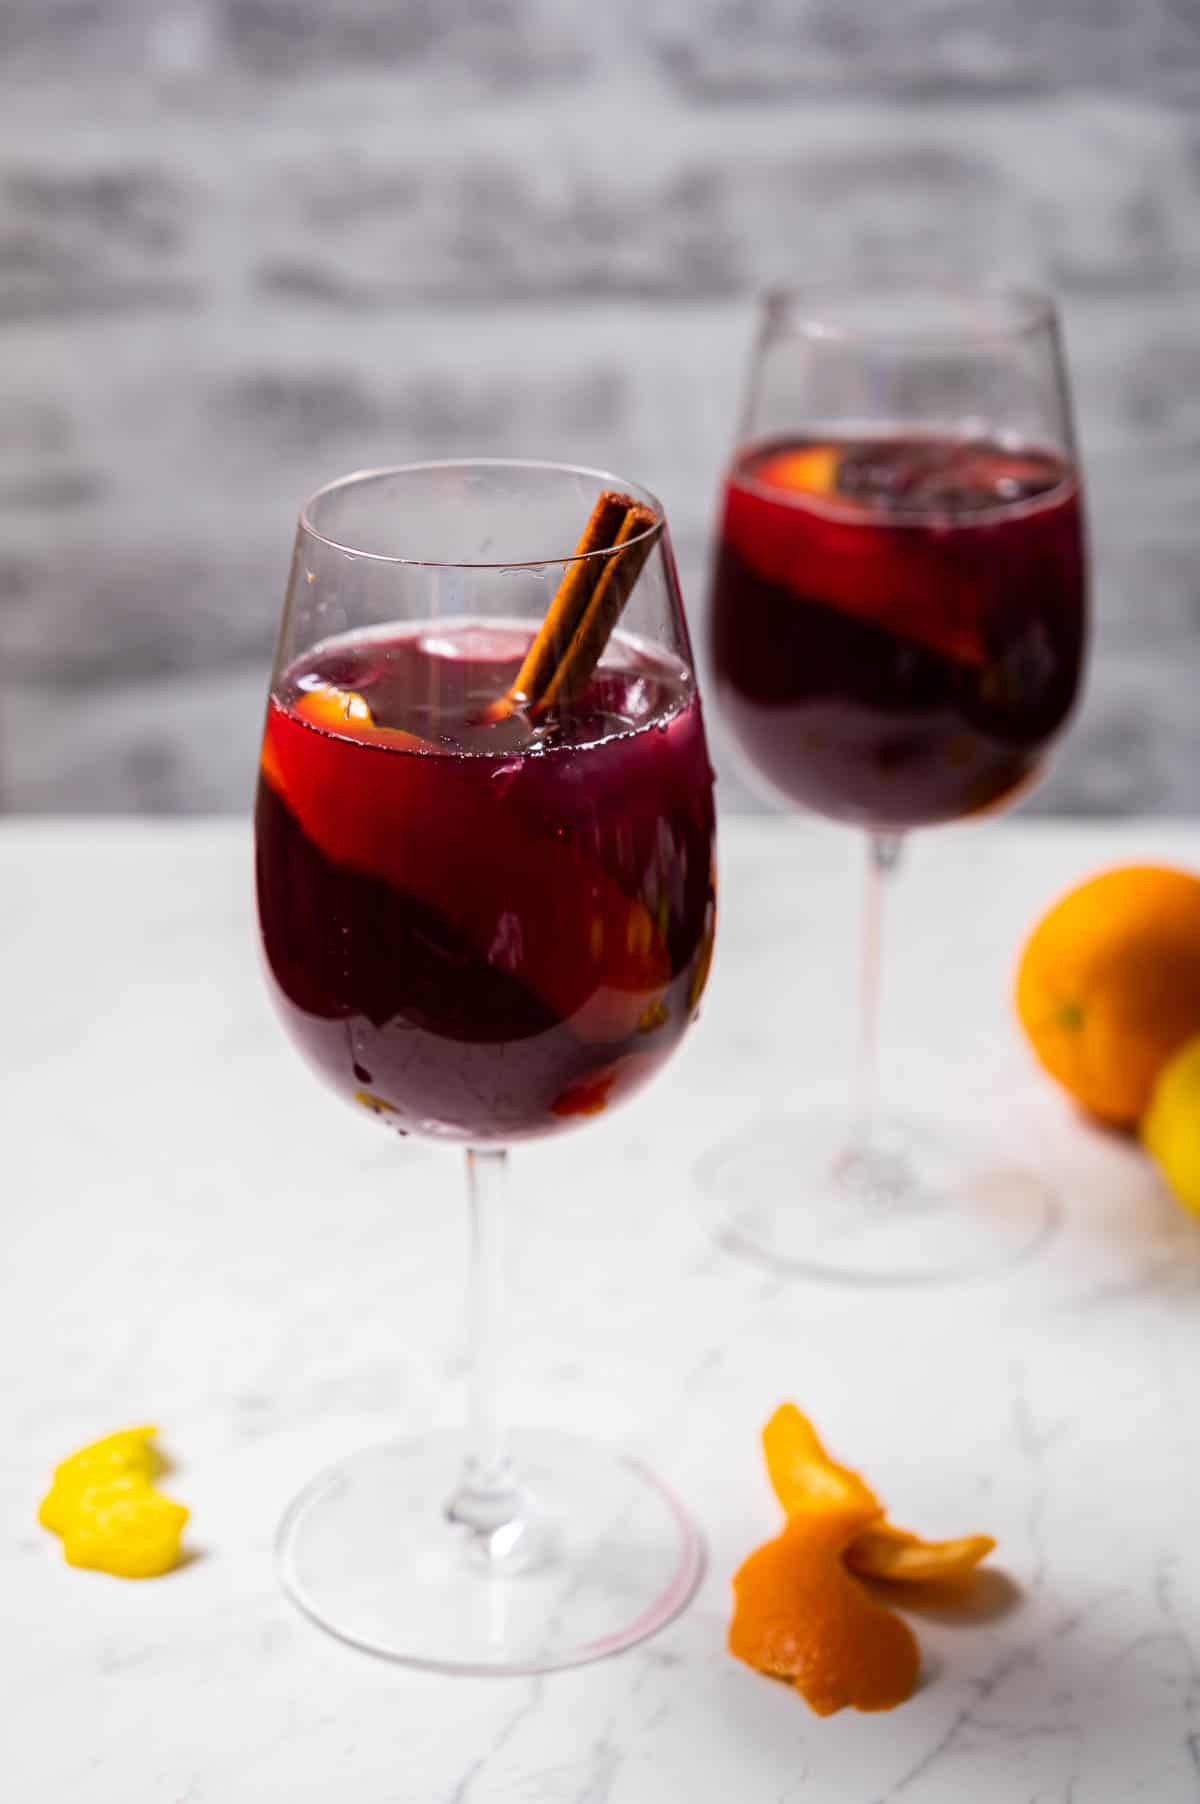 Two wine glasses of sangria garnished with cinnamon sticks and citrus